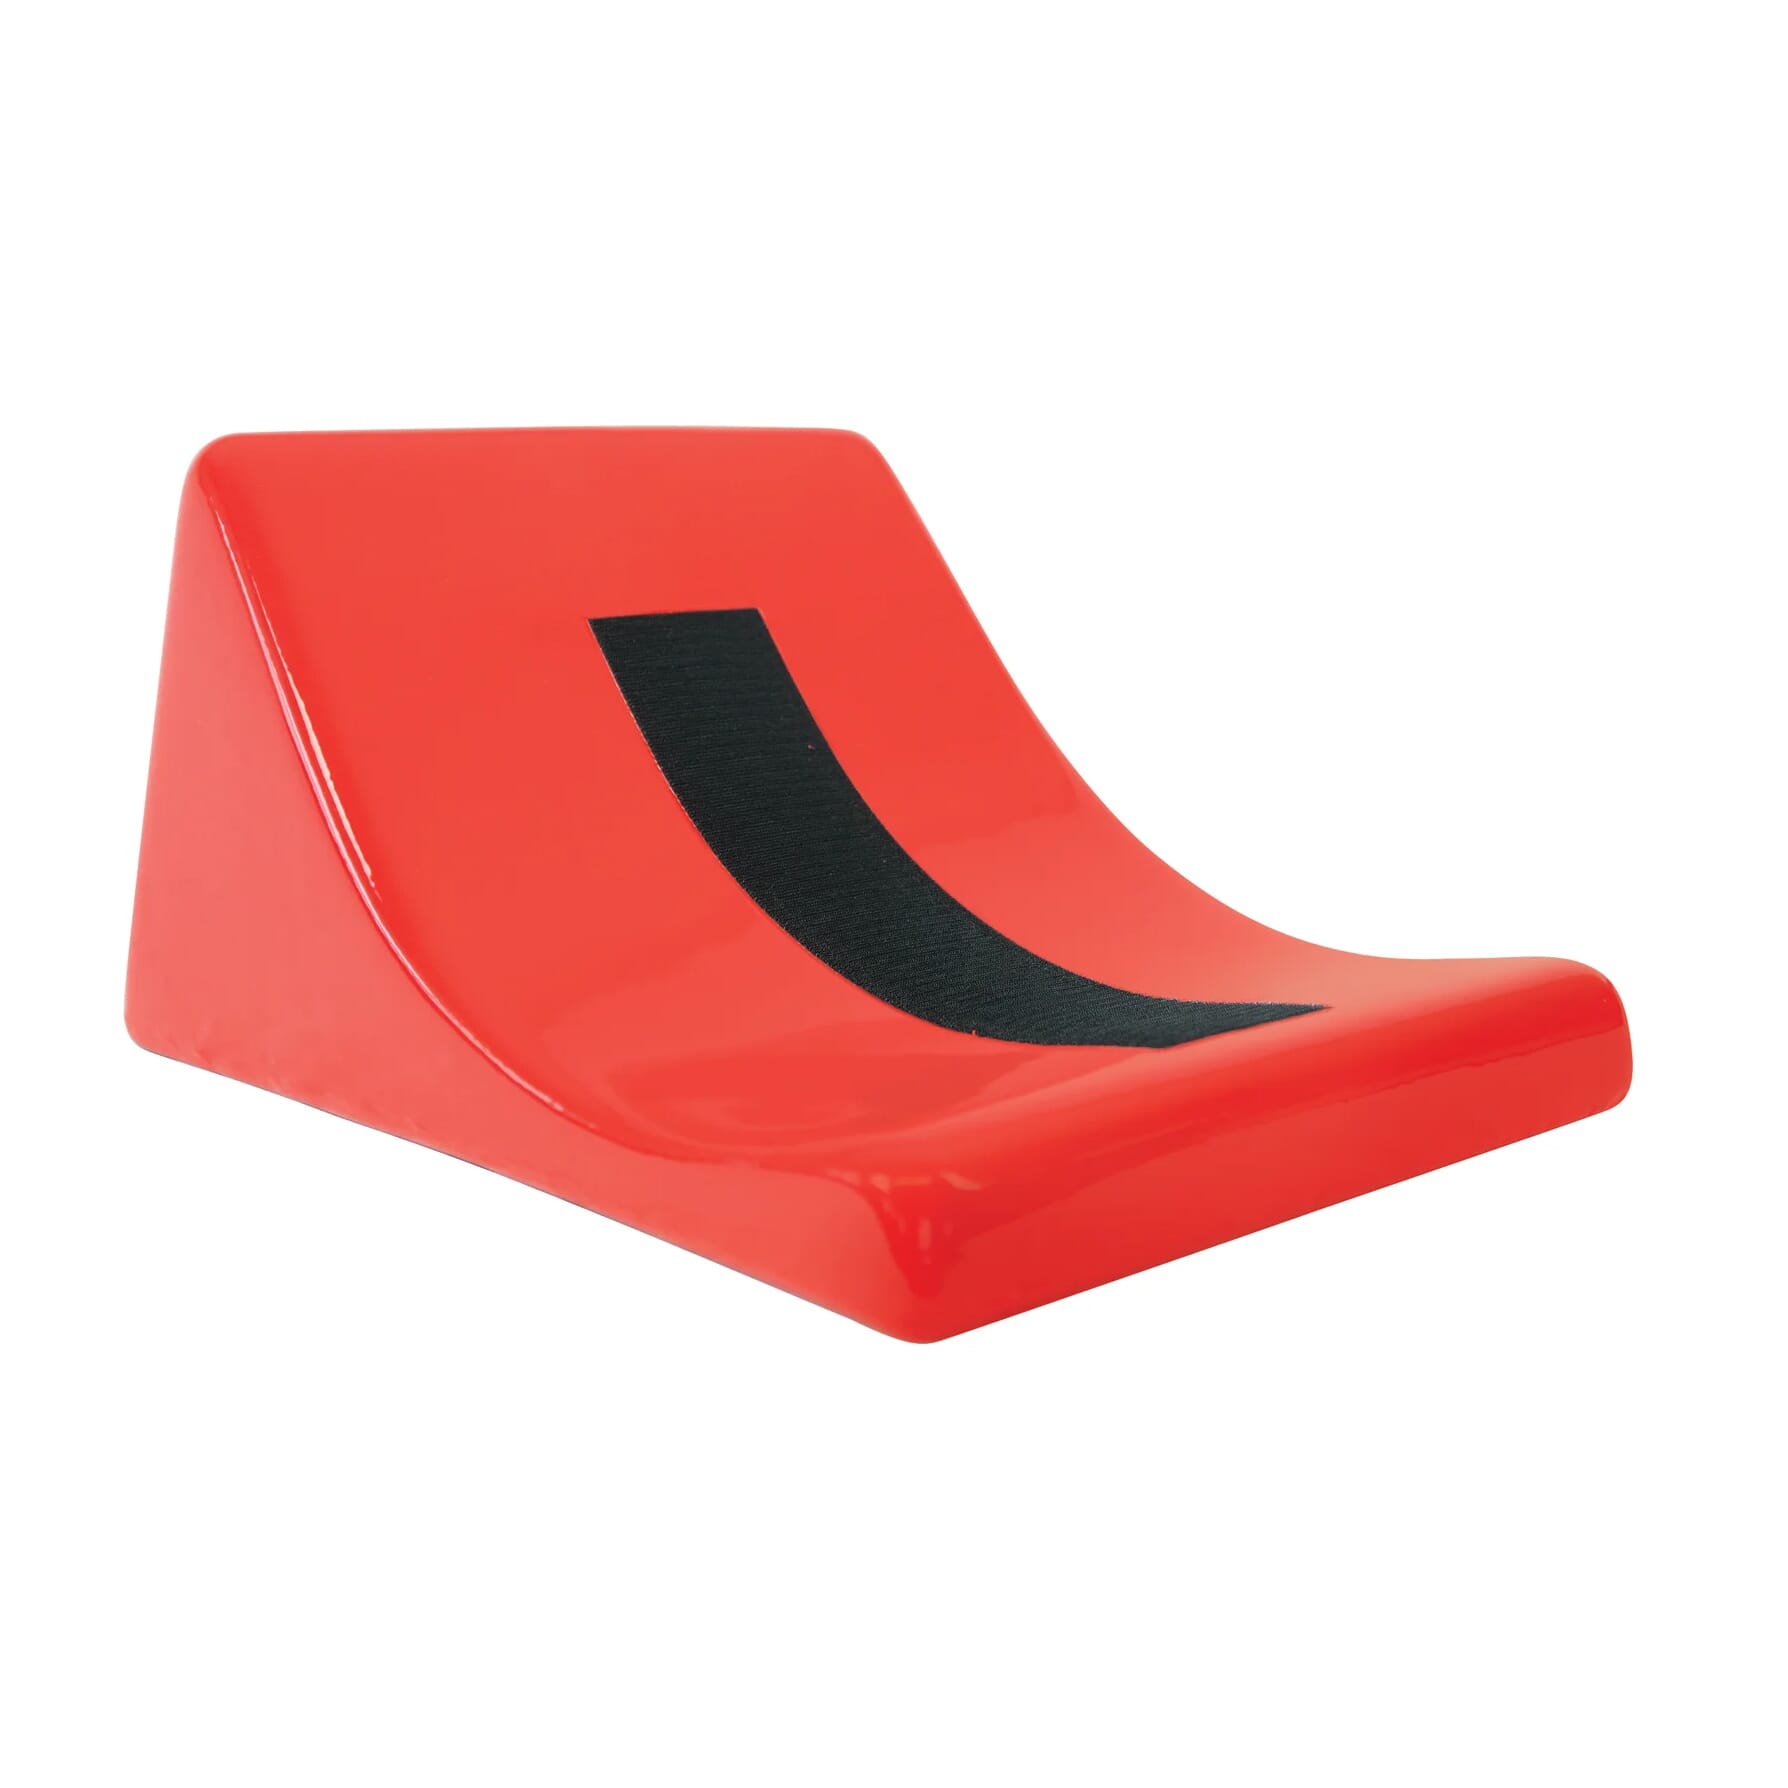 View Tumble Forms Floor Sitter Wedge Red SML information